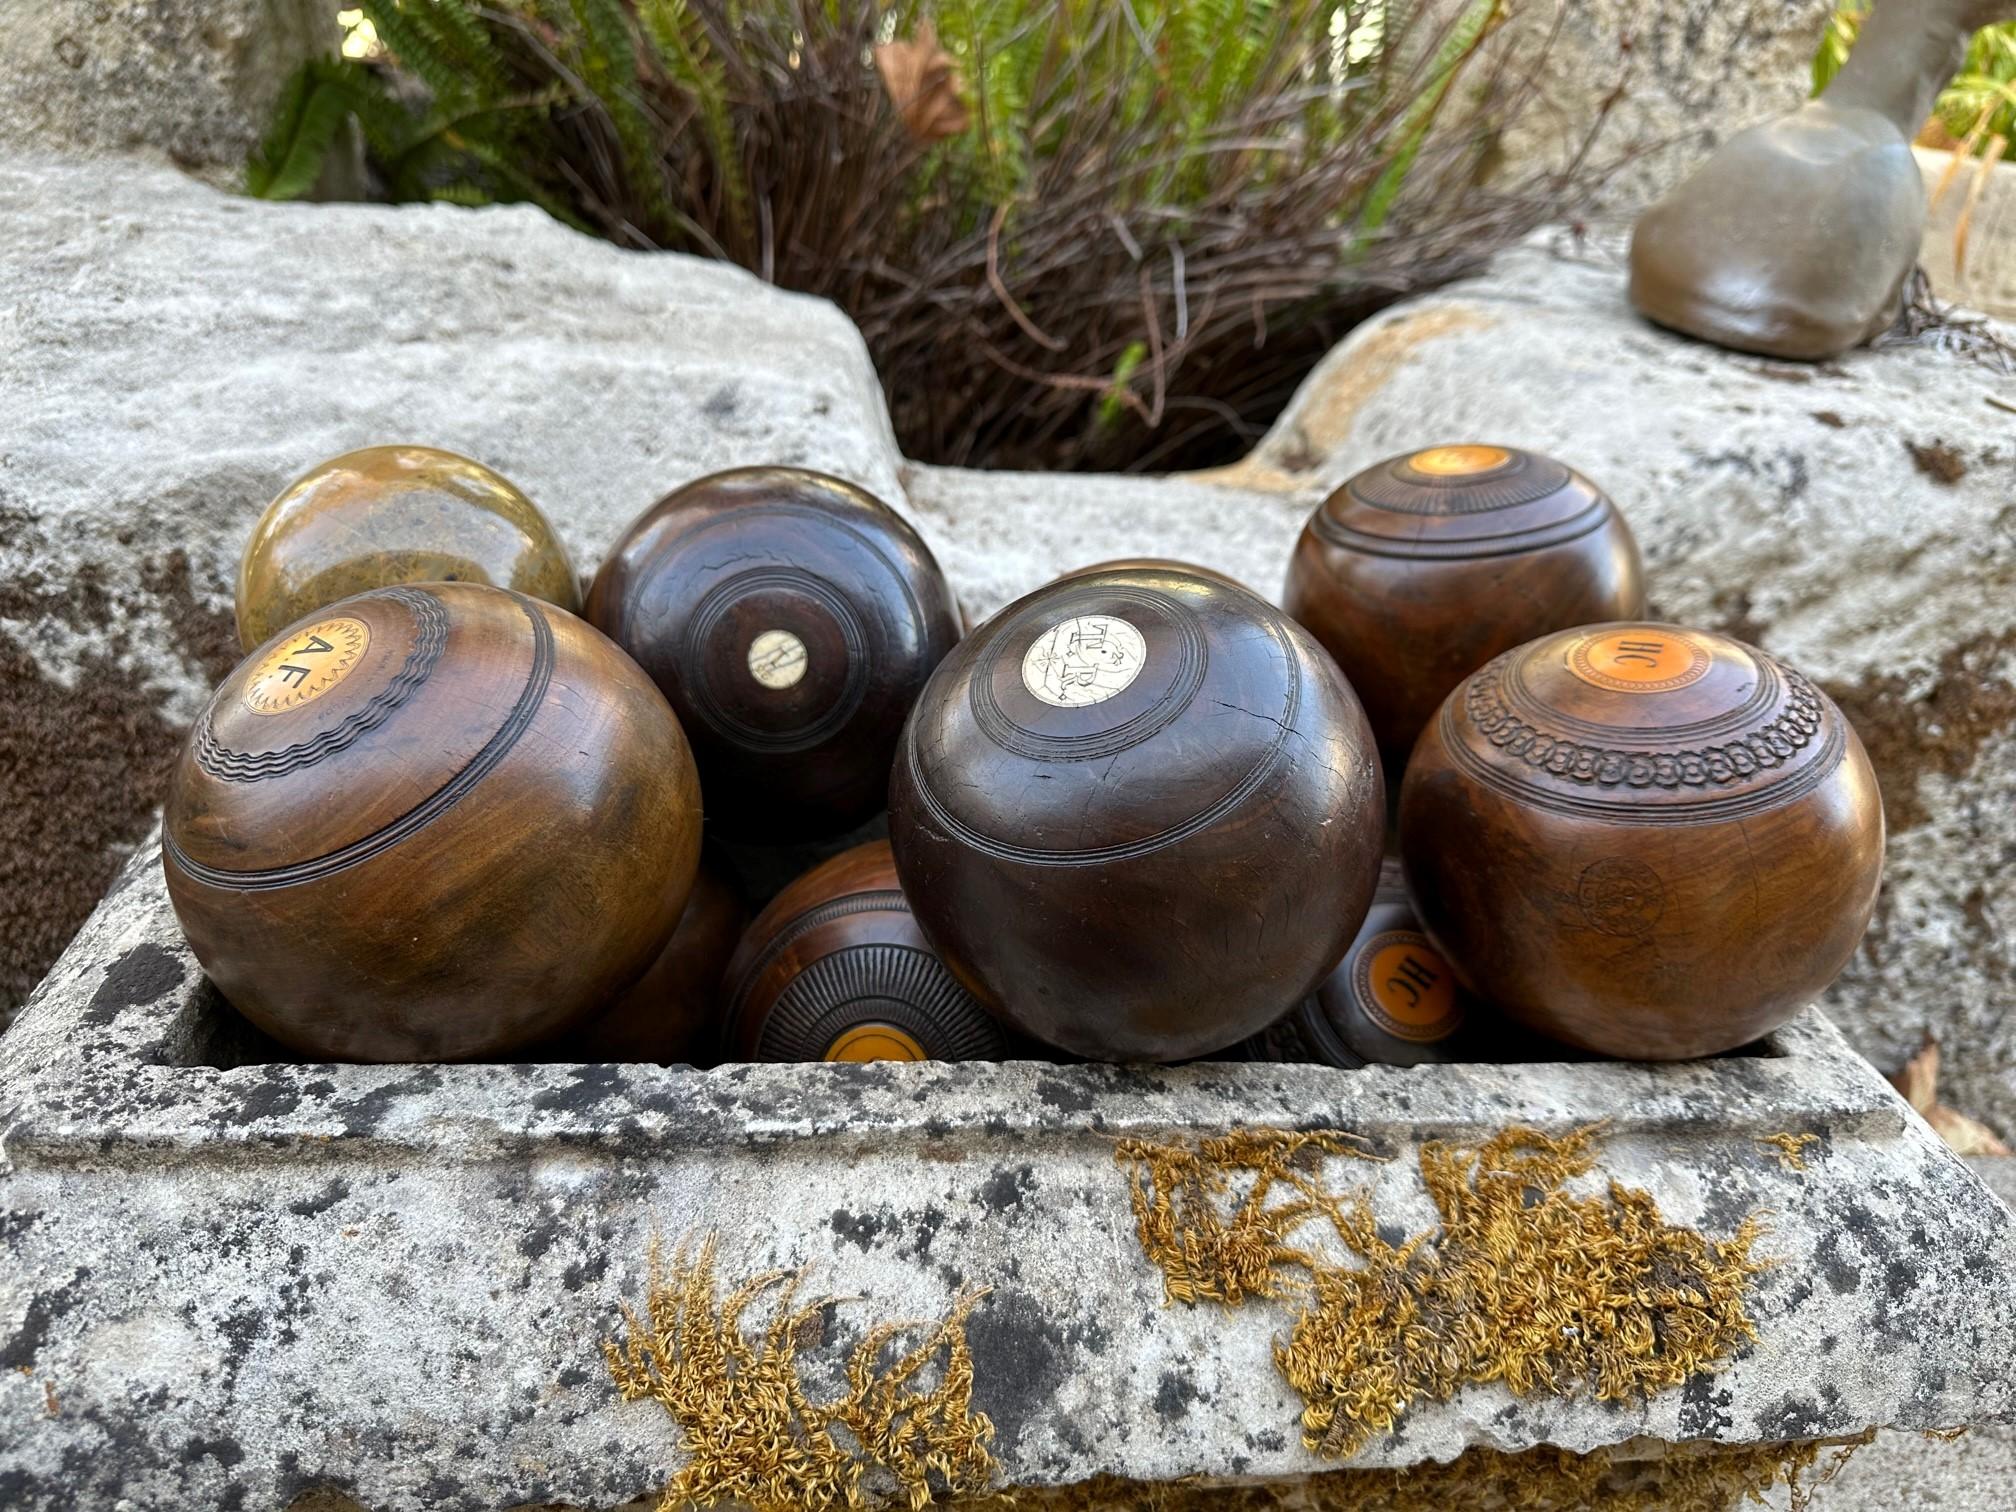 10 Carpet Lawn Bowling Hand Carved Wood & Stone Balls Antique Office Gift Idea For Sale 10